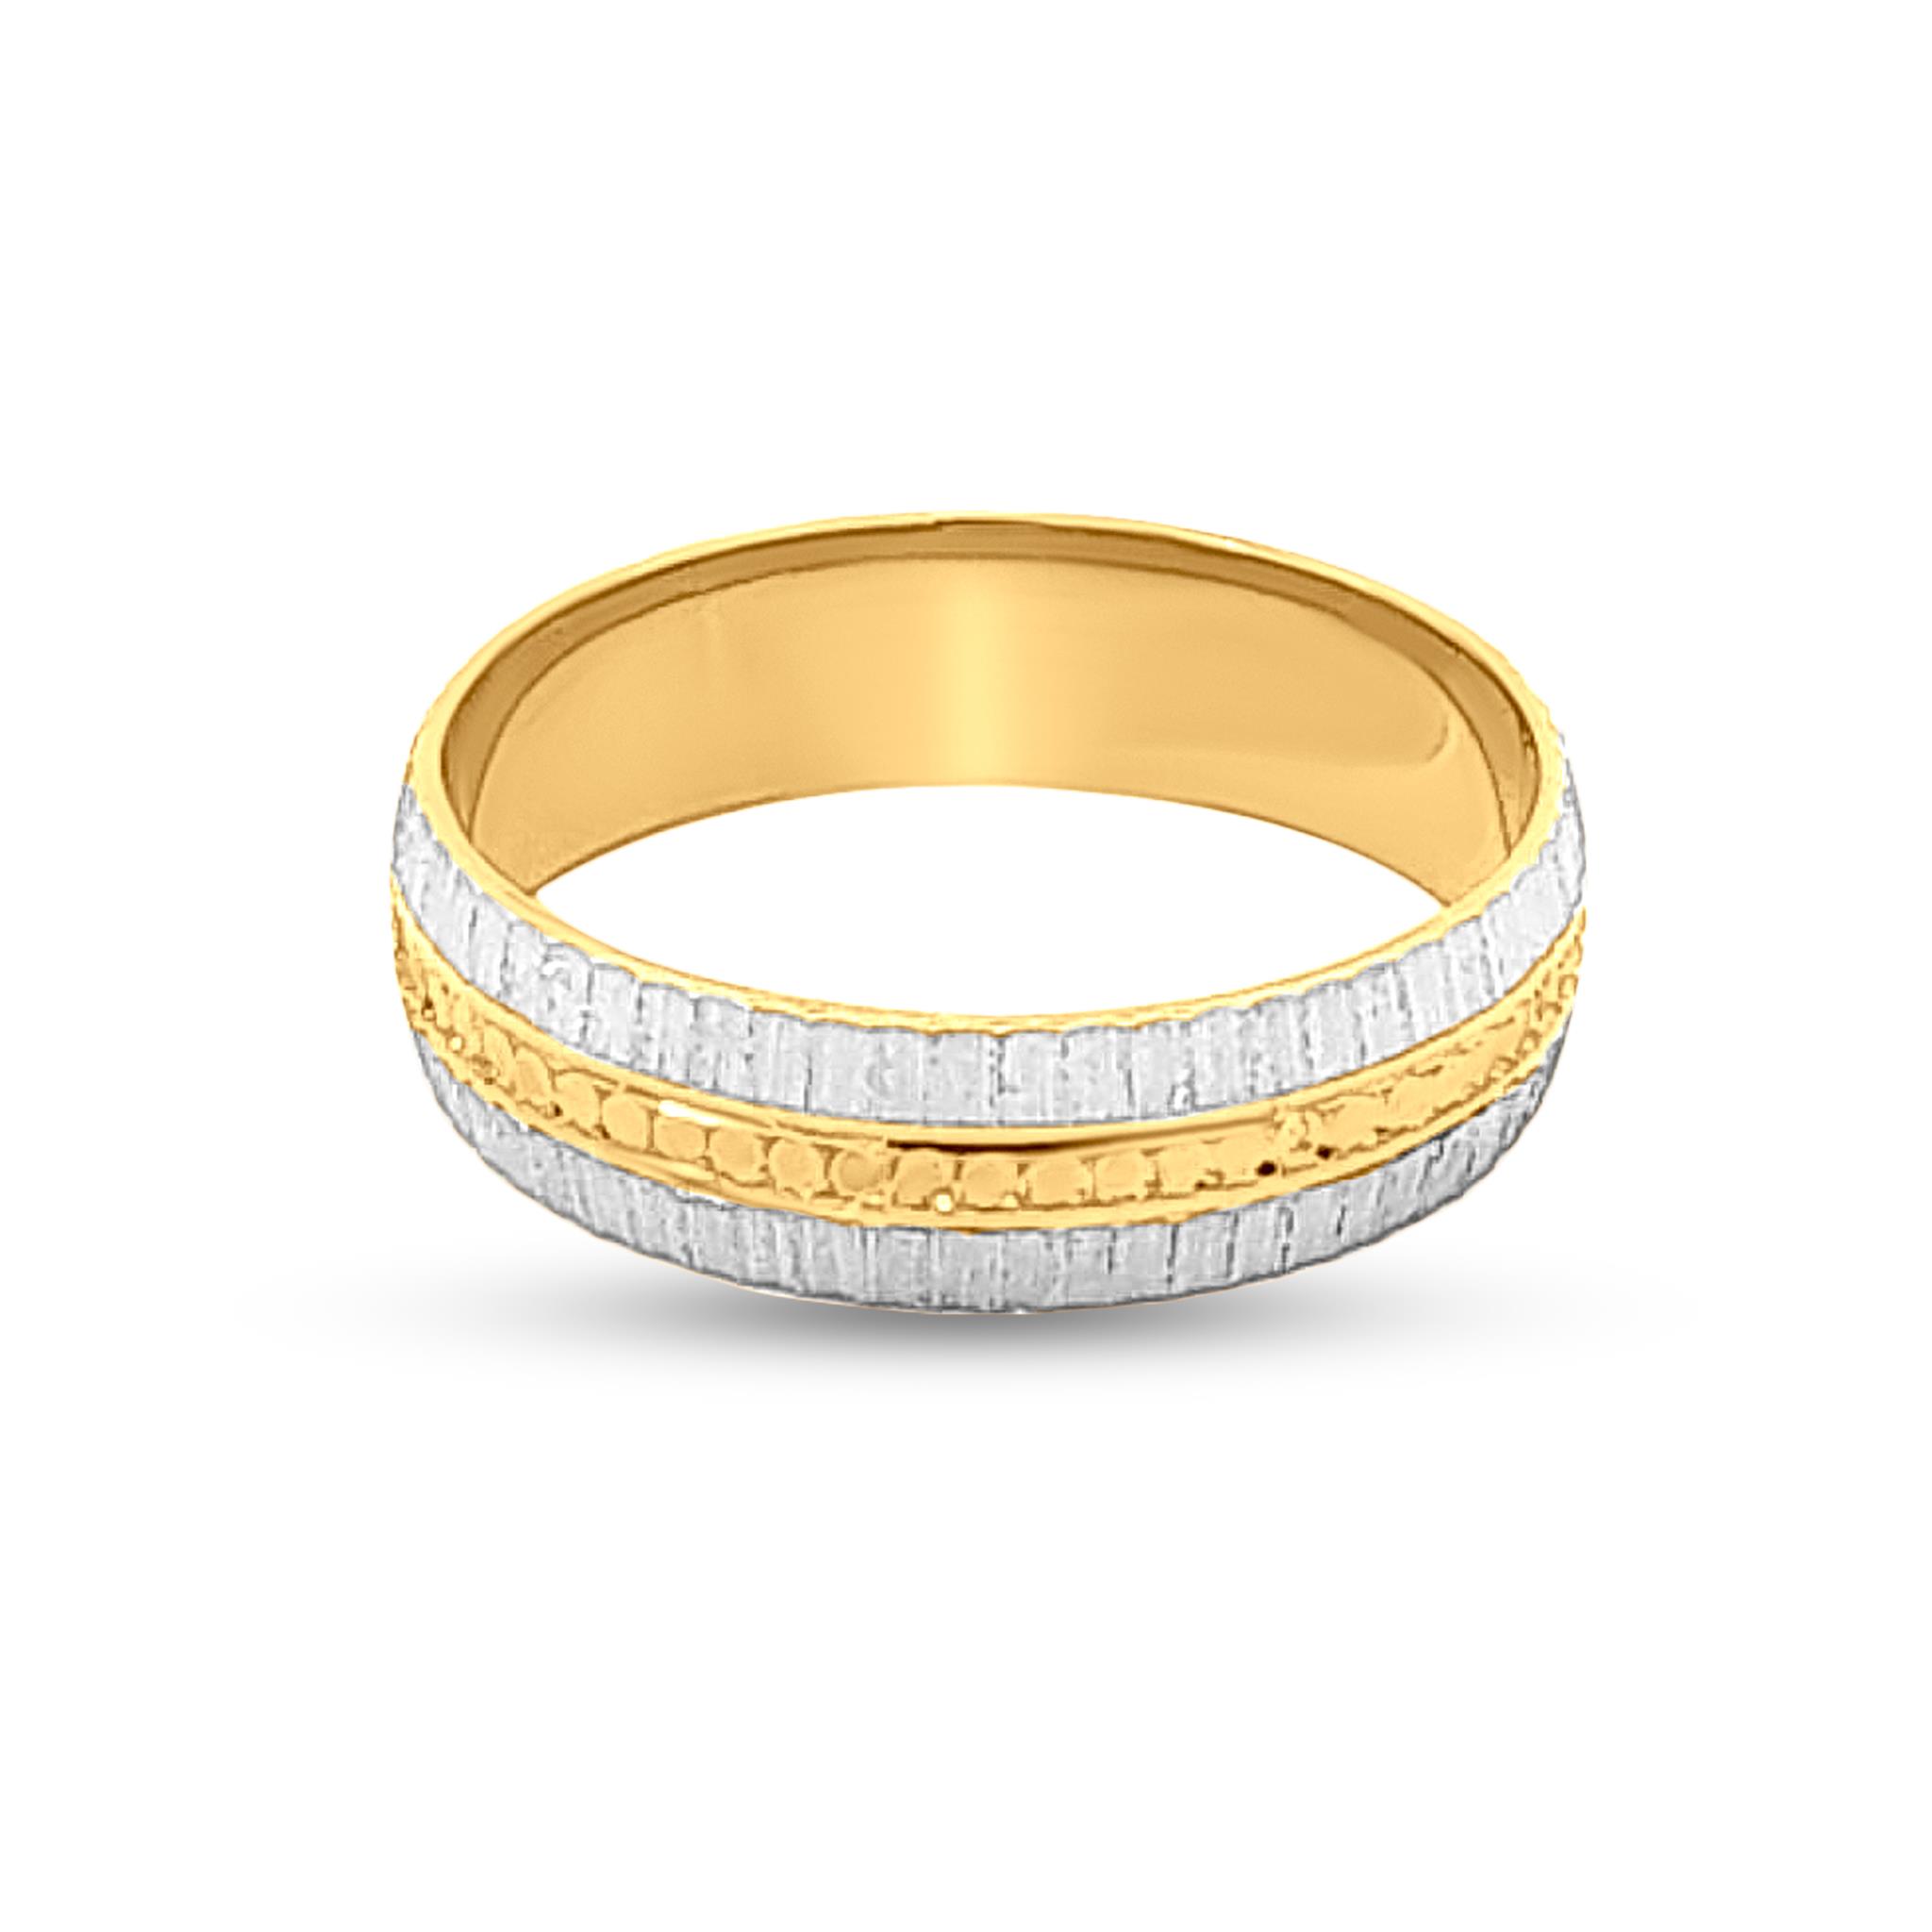 Buy Finely Crafted 18Kt Yellow Gold Men's Ring Online | ORRA